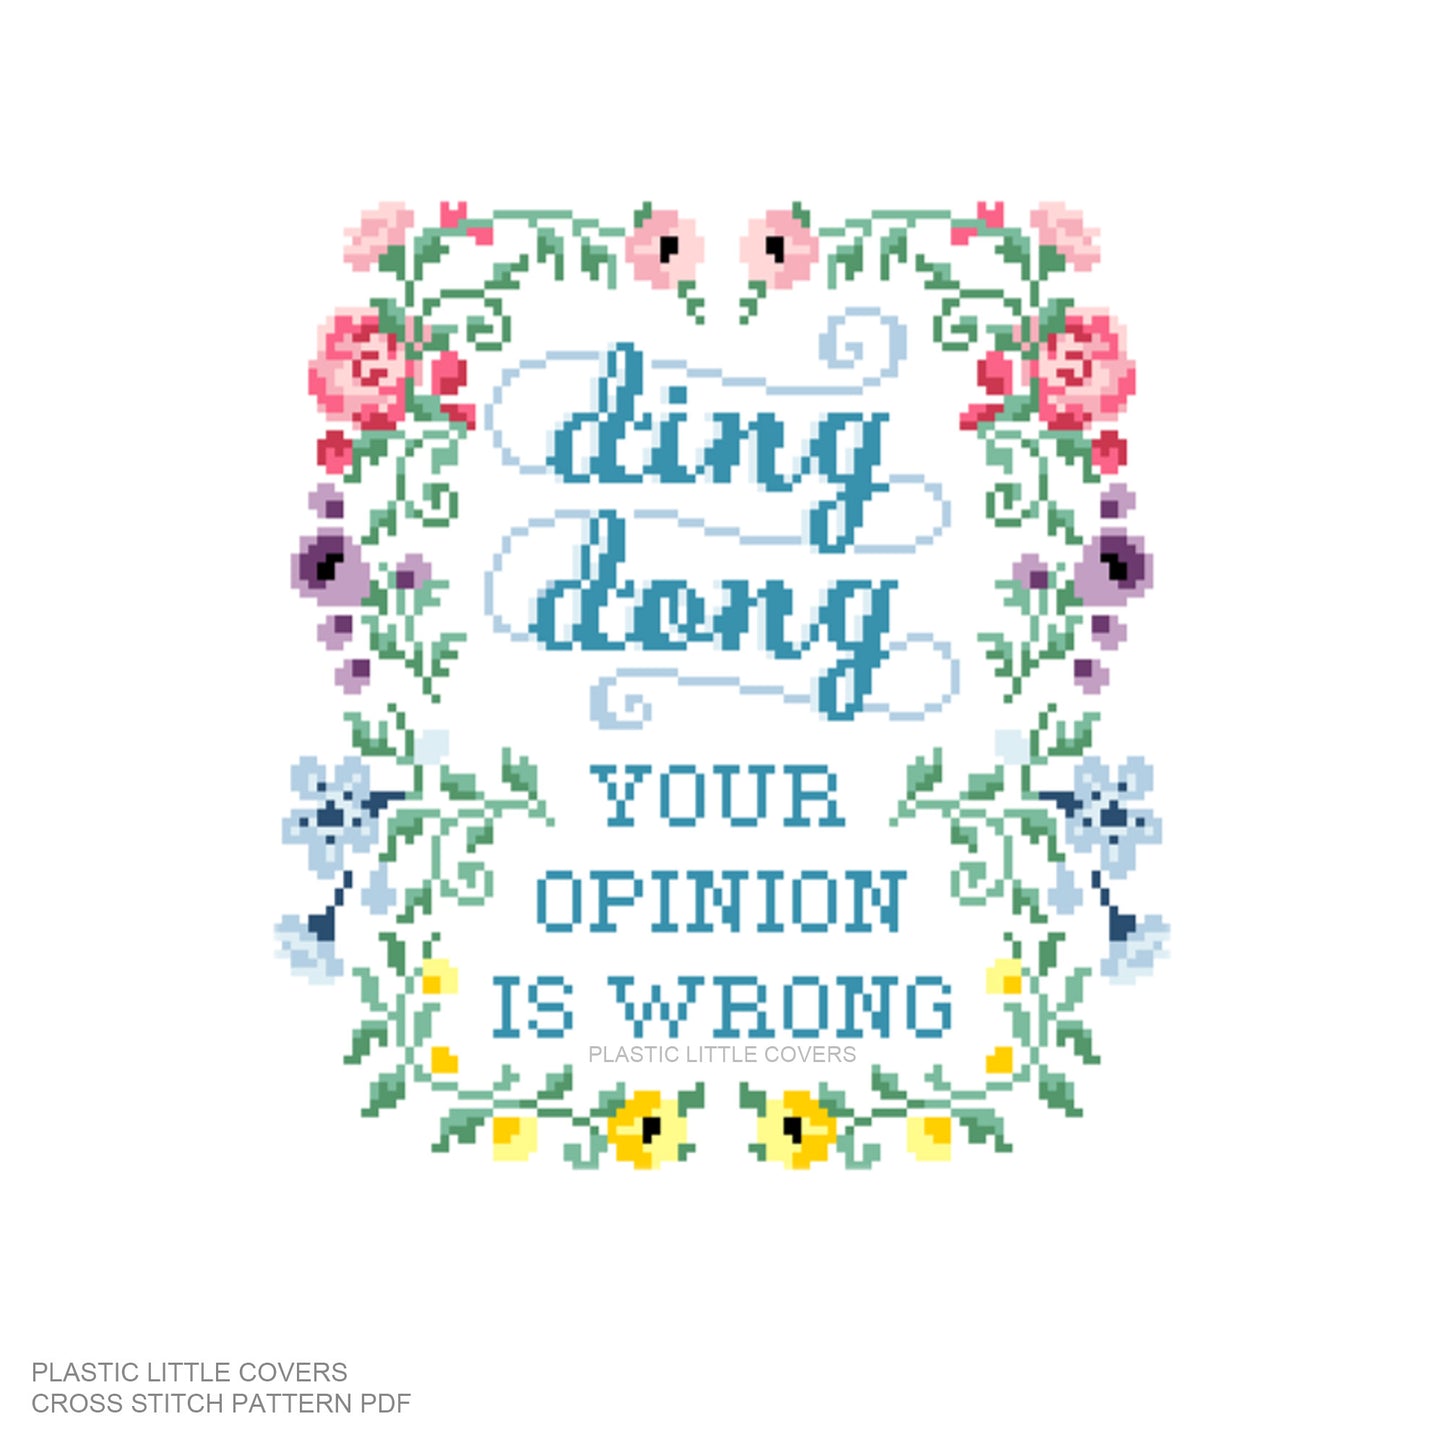 Ding Dong, Your Opinion Is Wrong - Cross Stitch Pattern PDF.